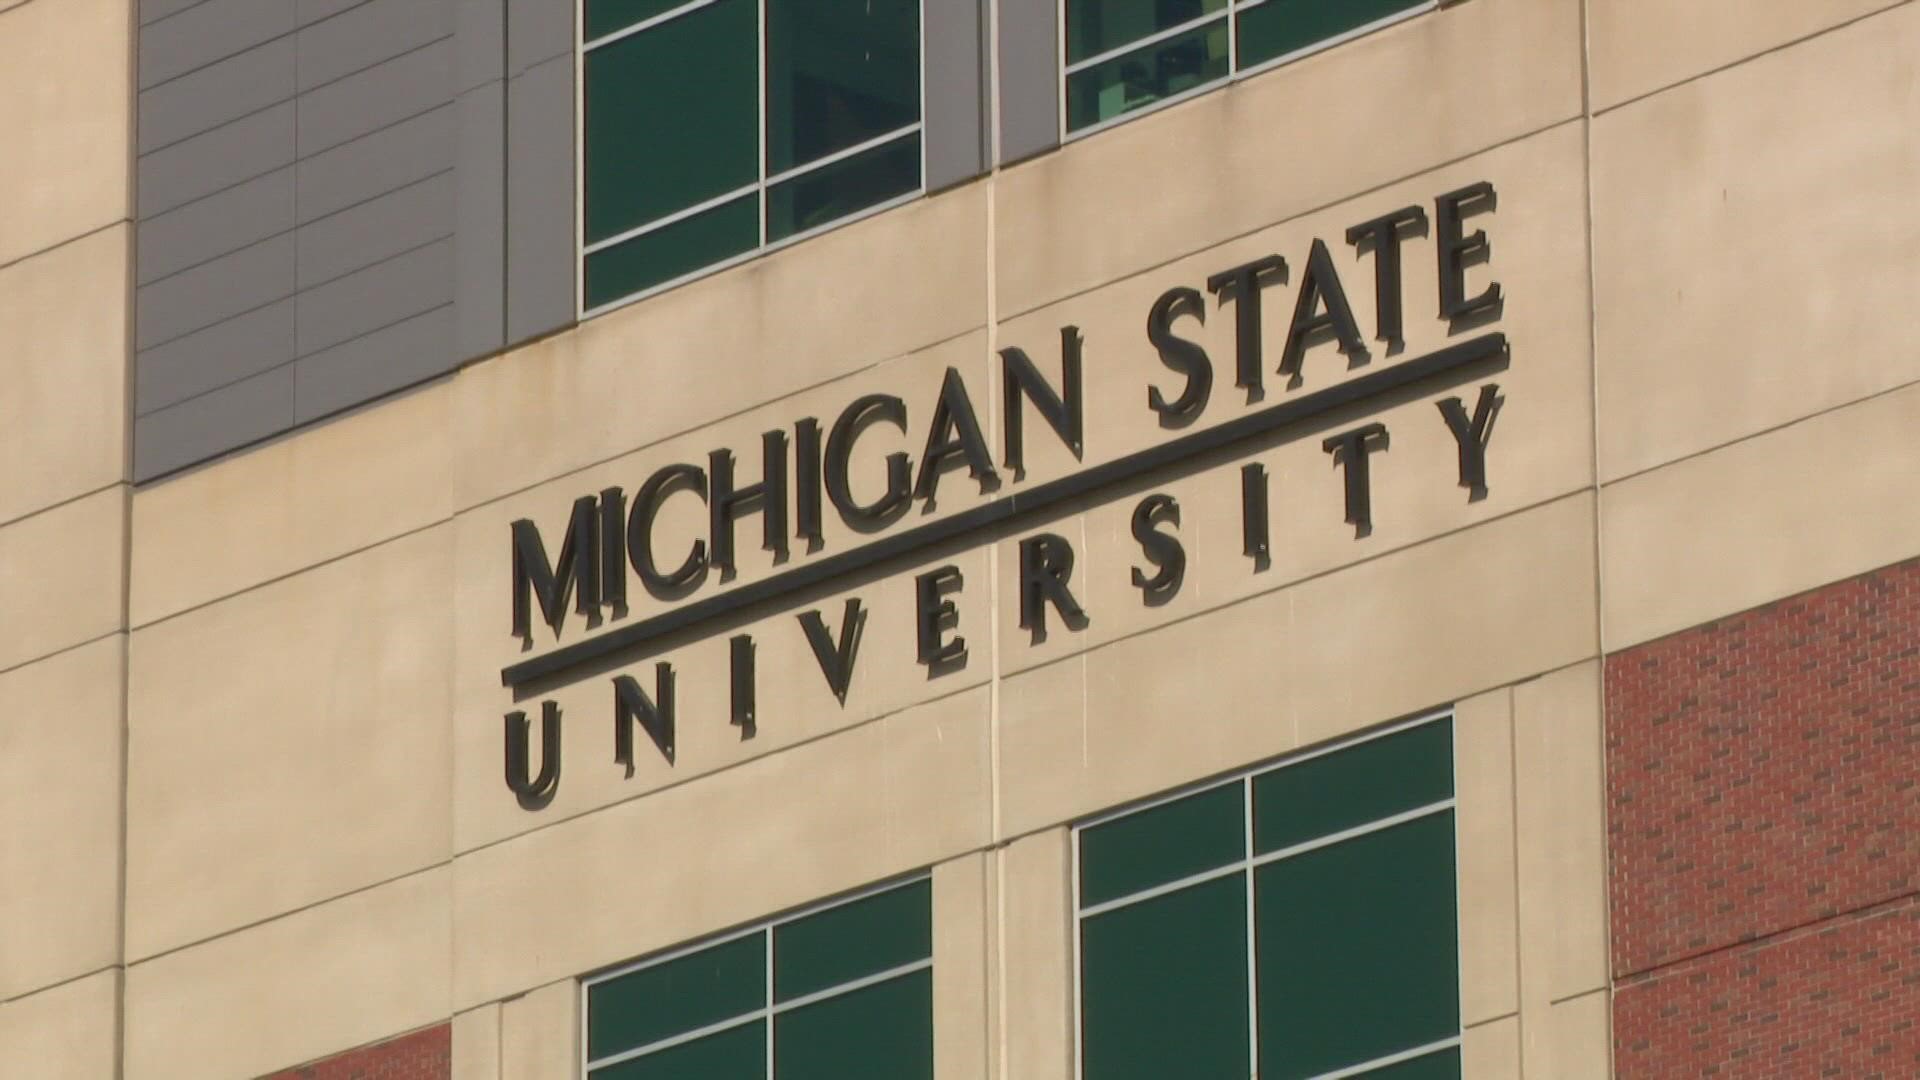 MSU staff member Jeanna Norris sued the school over the vaccination mandate, claiming "natural immunity" after previously contracting the virus.